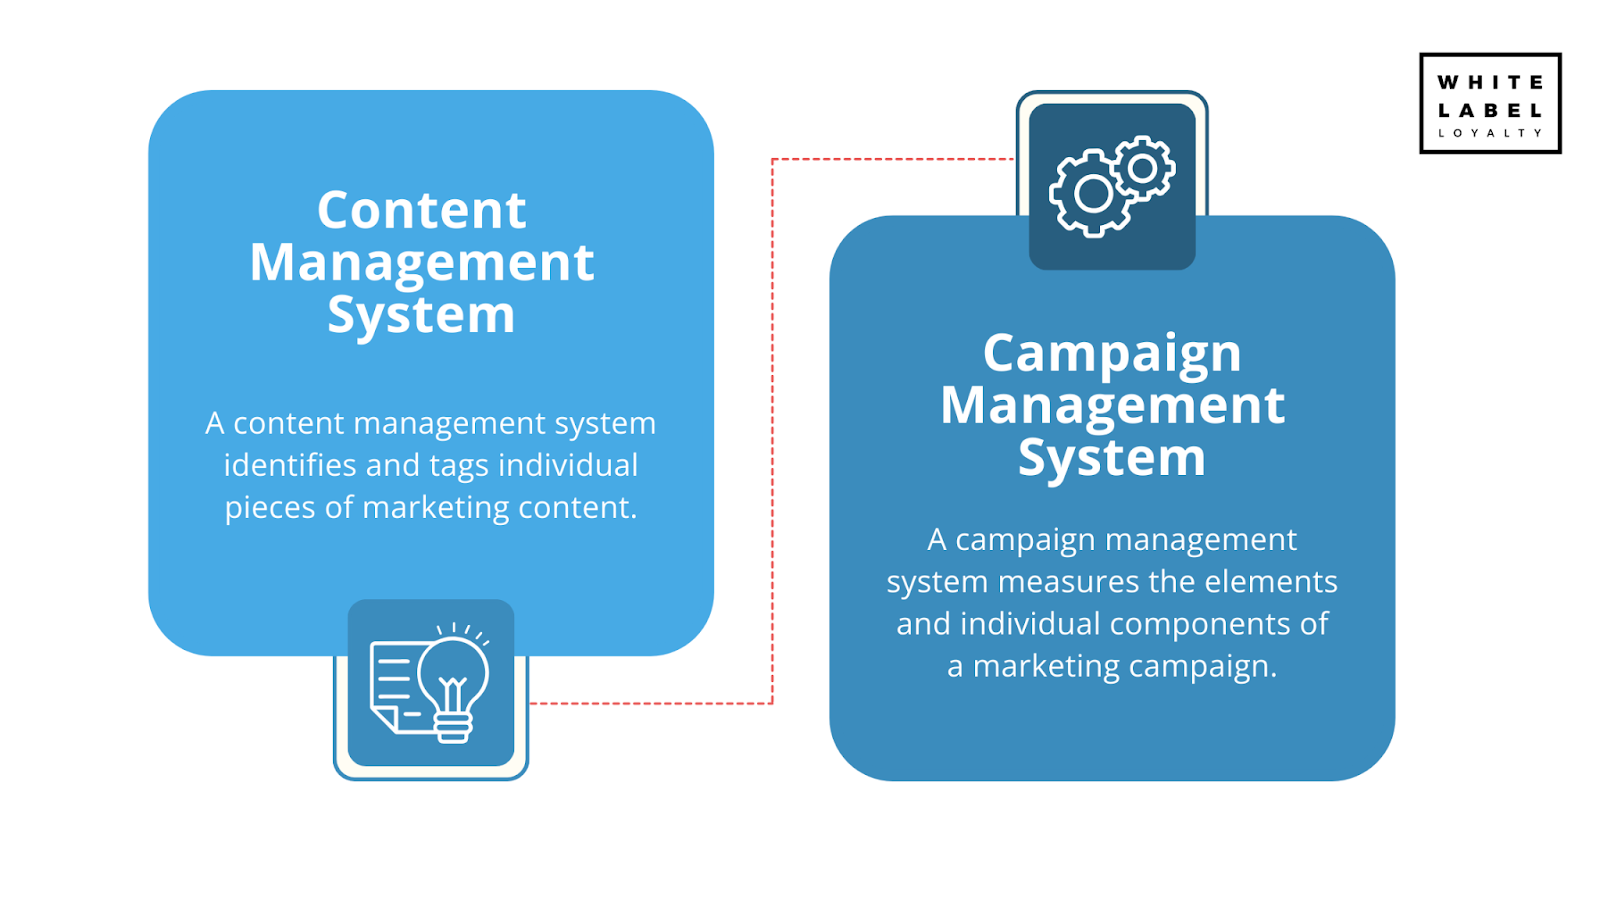 Campaign management system: an explanation of the differences between campaign management systems and content management system.